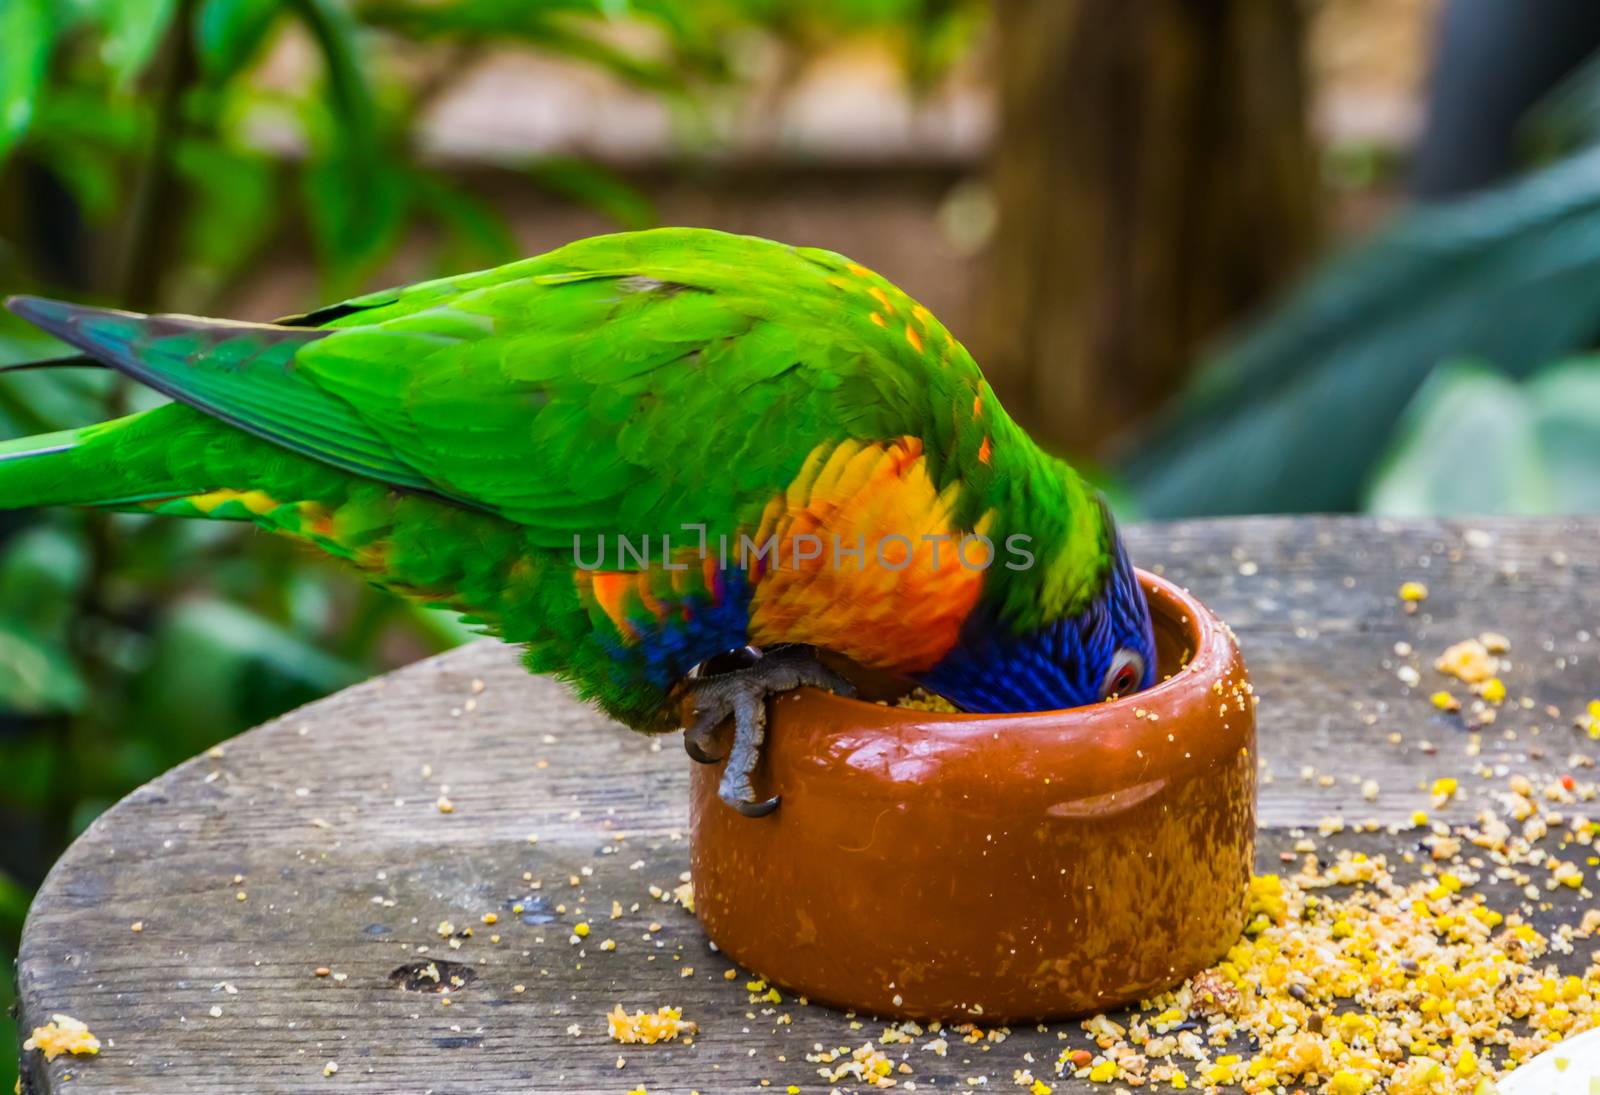 closeup of a rainbow lorikeet with its head in the feeding bowl, bird diet and care, Tropical animal specie from Australia by charlottebleijenberg